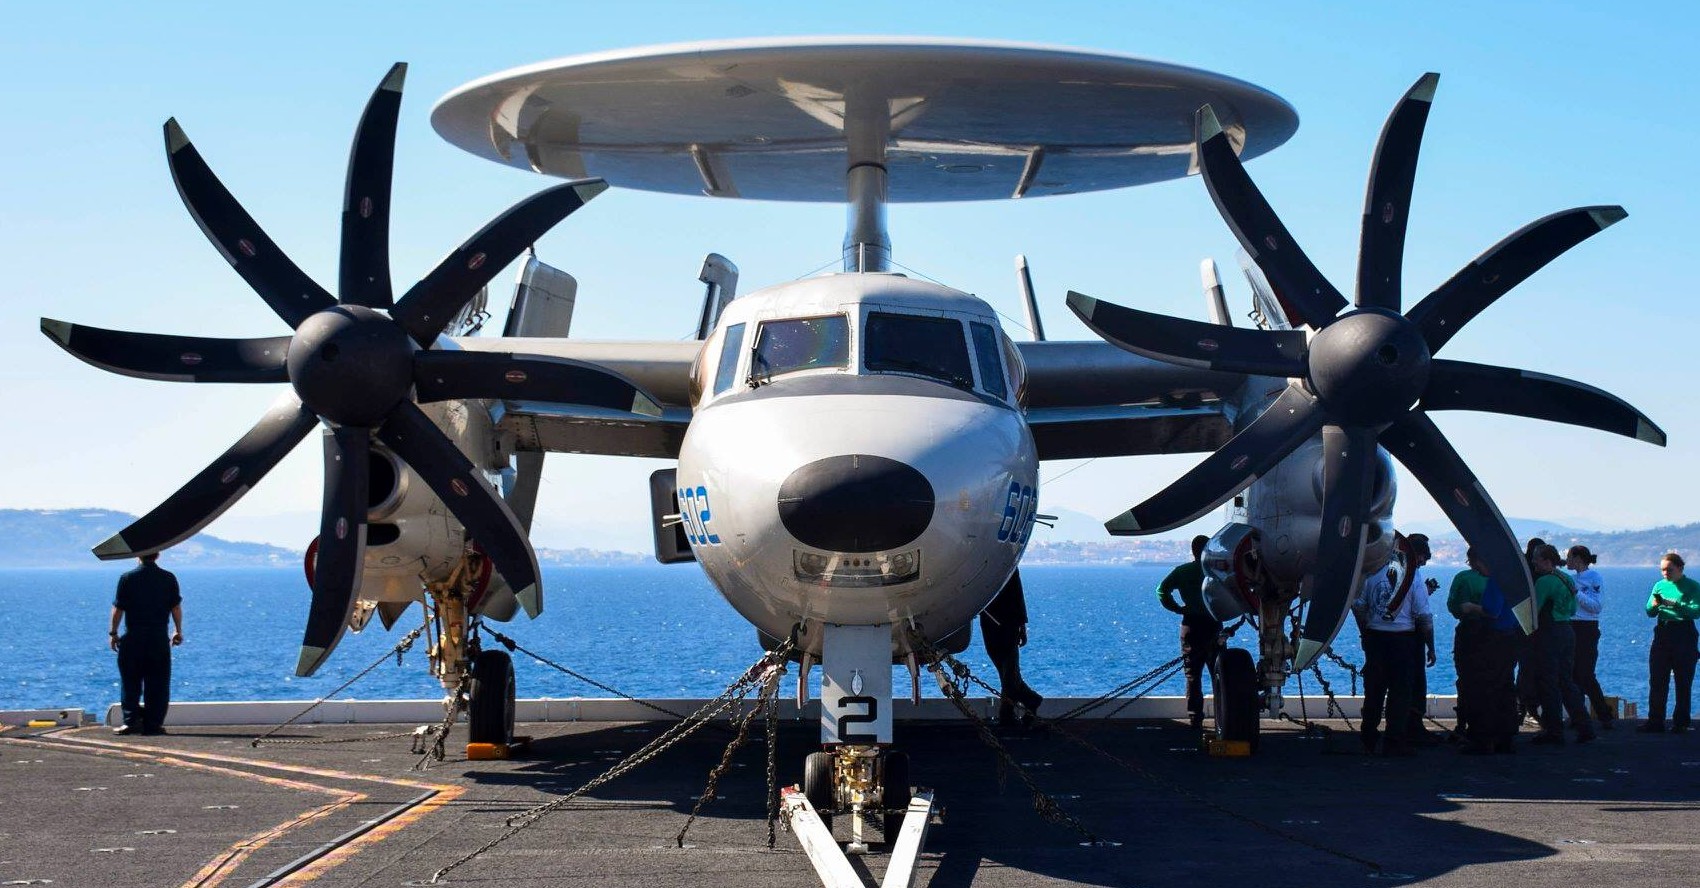 vaw-121 bluetails airborne command and control squadron us navy e-2d advanced hawkeye cvw-7 uss abraham lincoln cvn-72 70